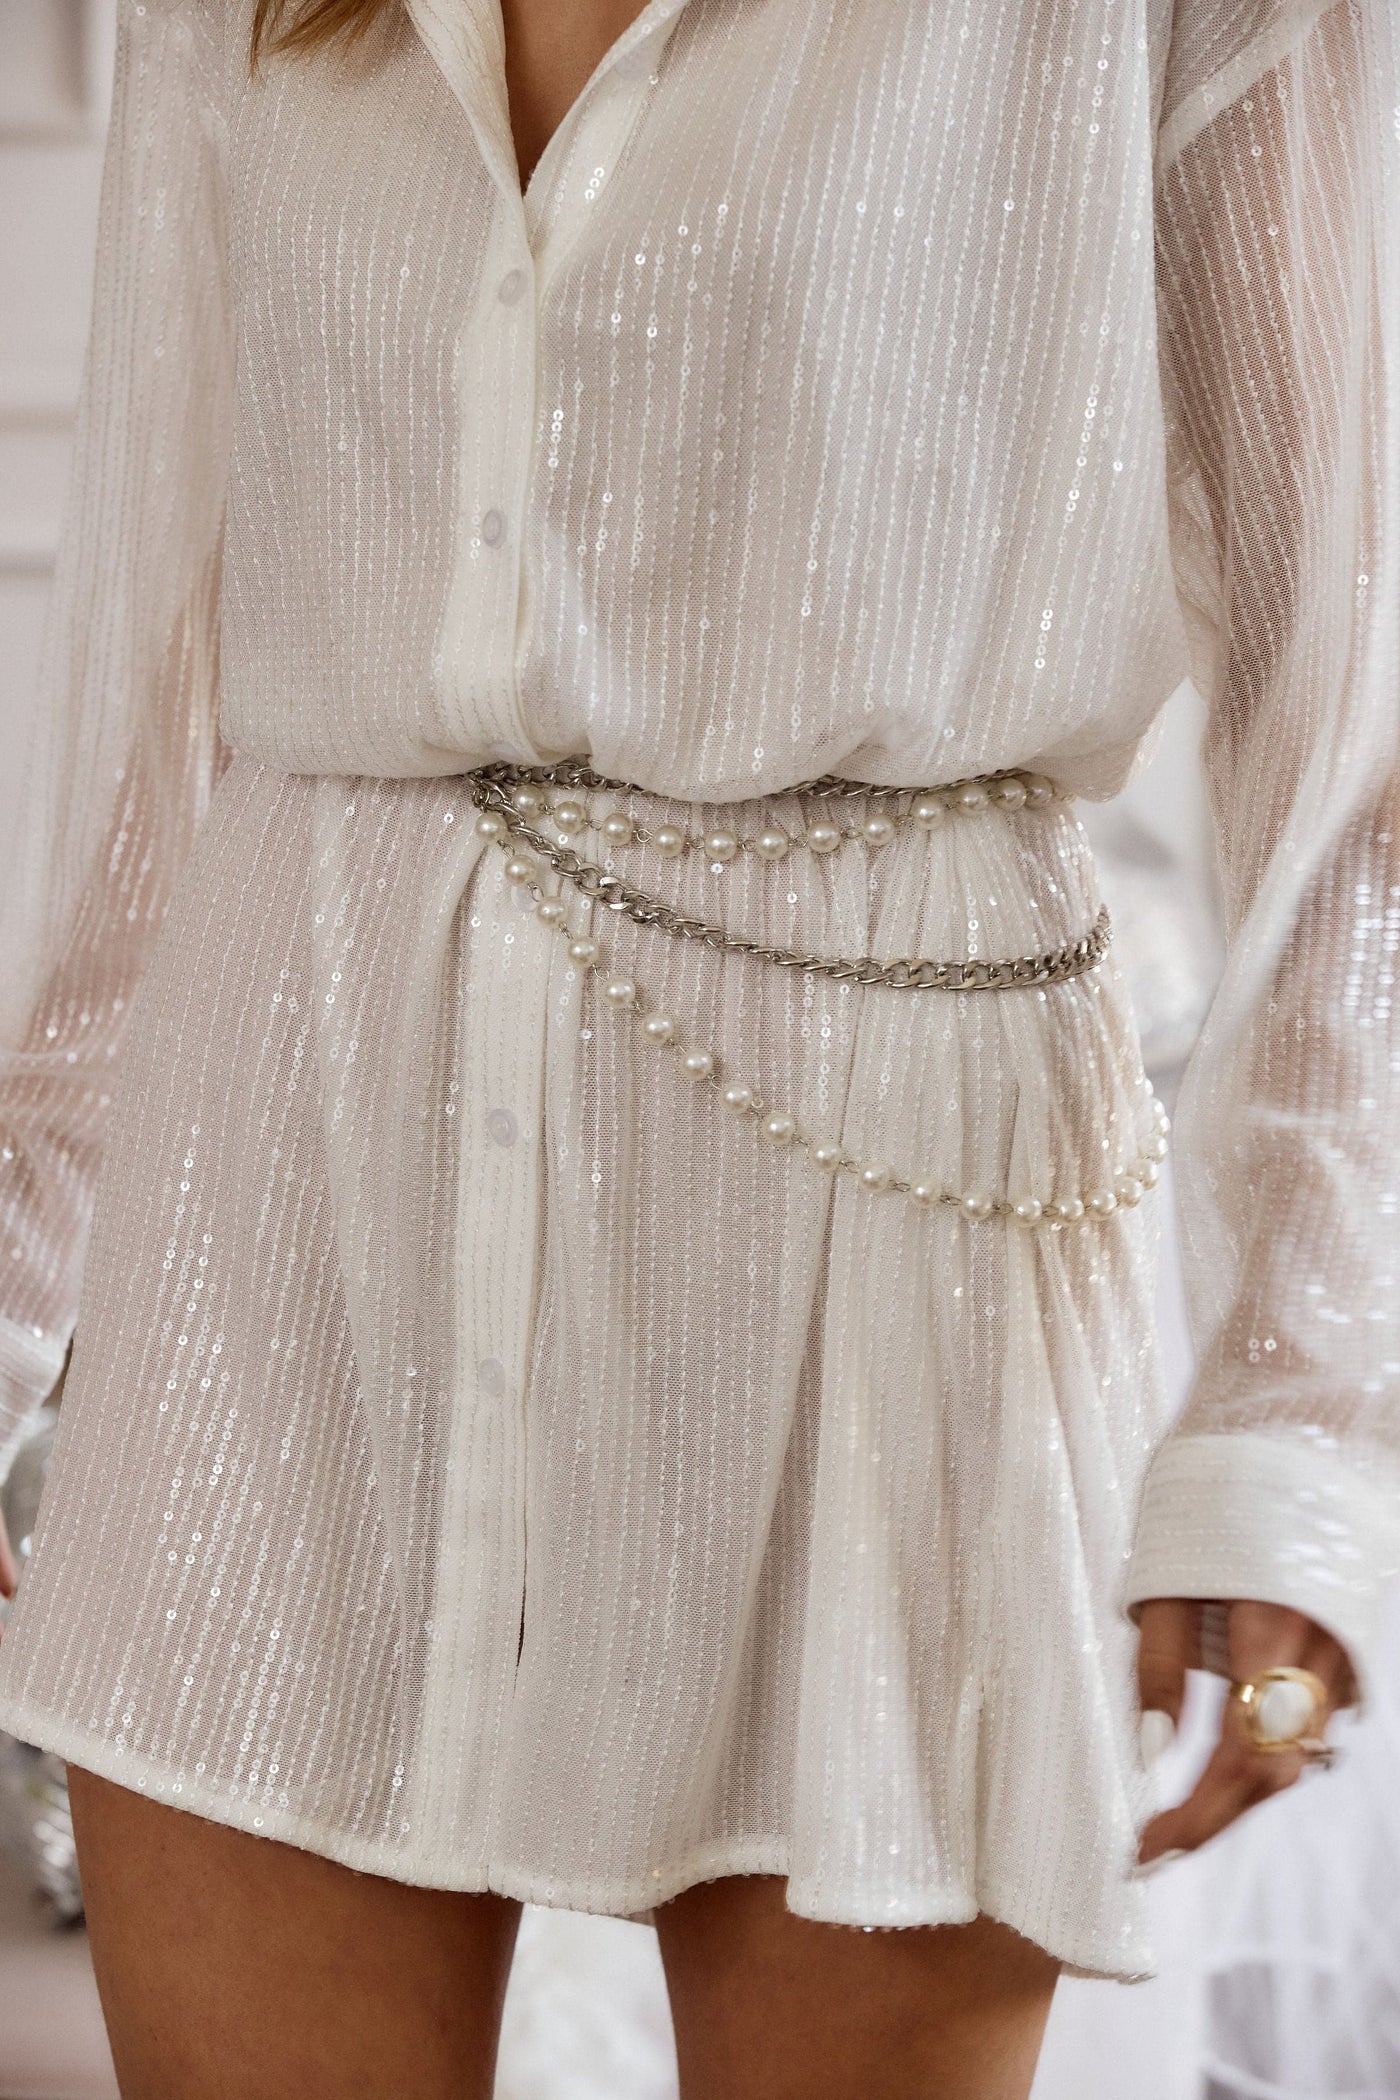 Mimi Pearl and Silver Chain Belt